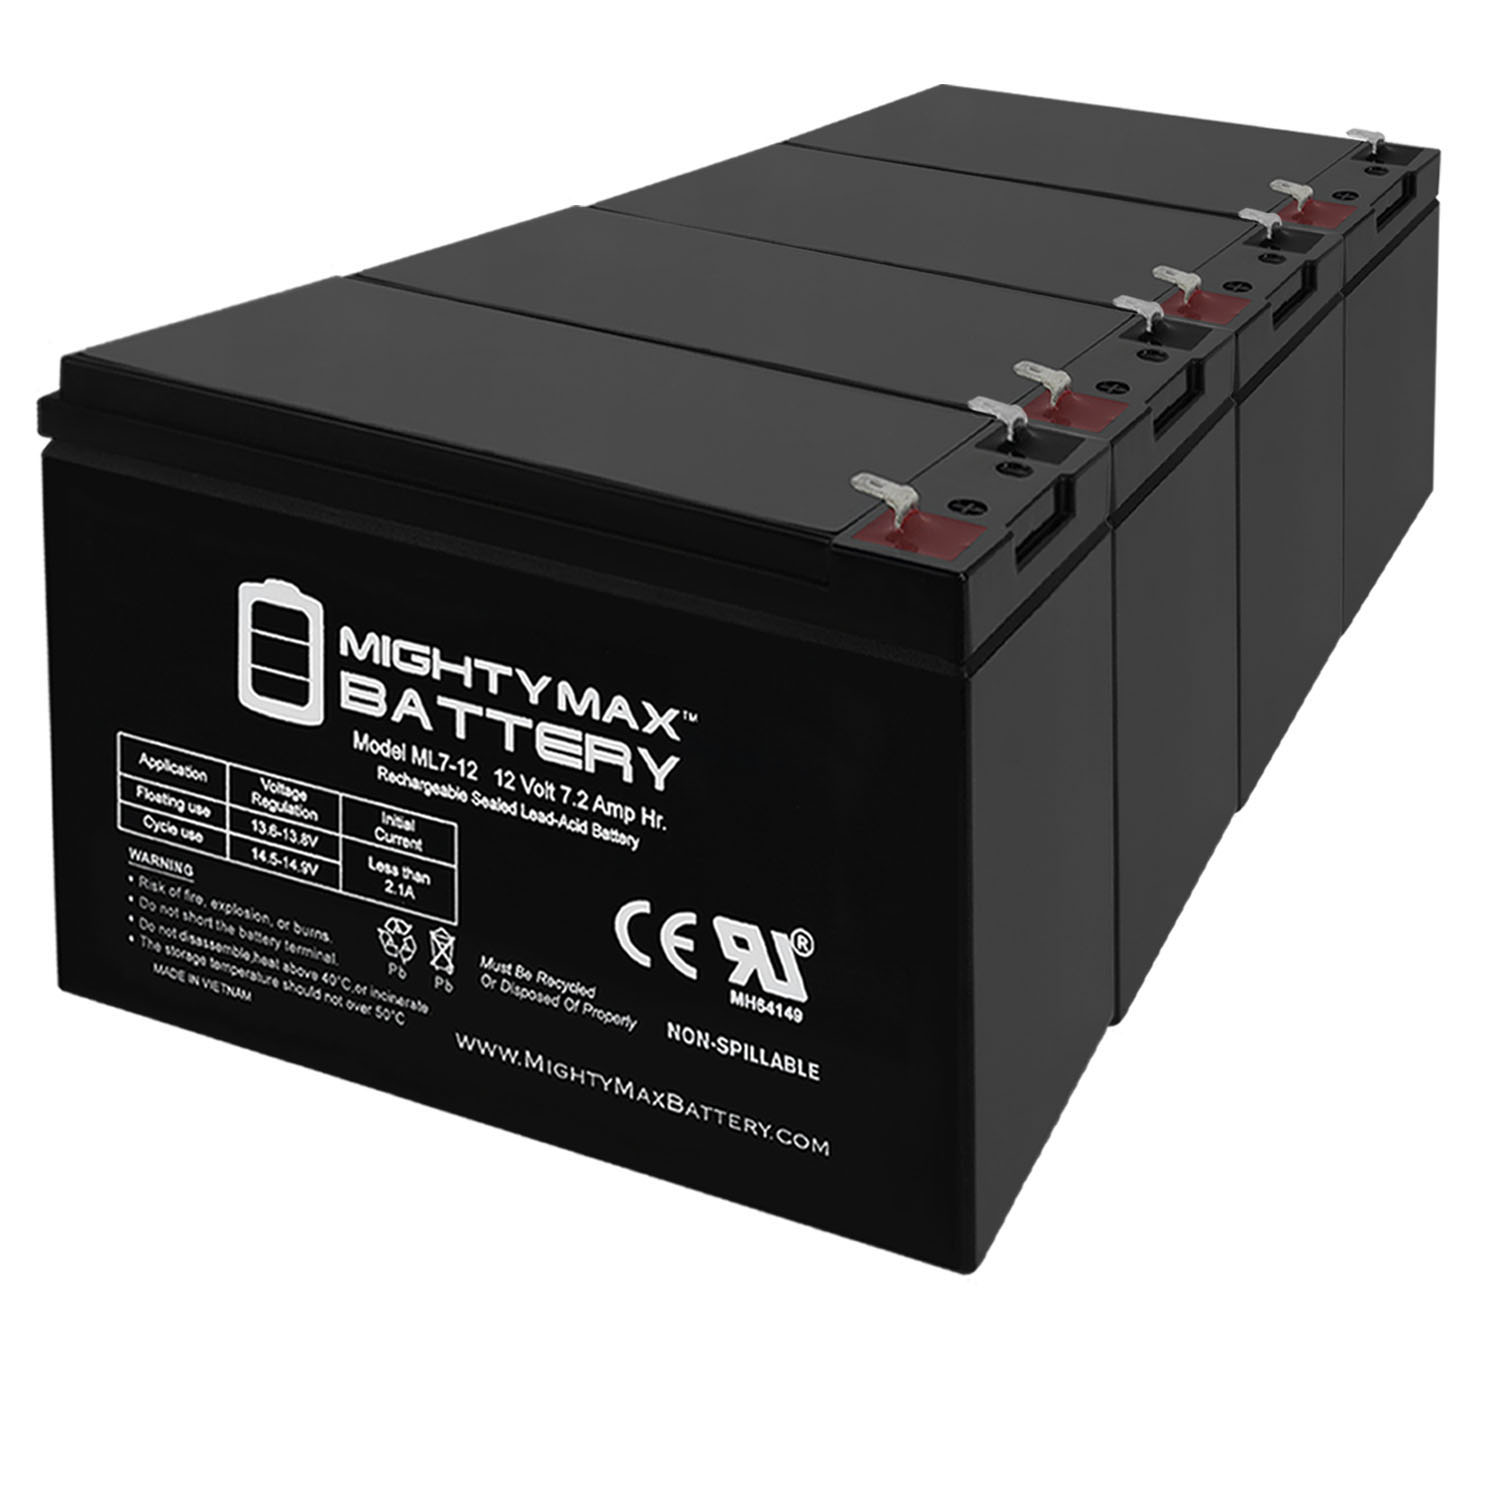 12V 7Ah SLA Replacement Battery for Eaton Powerware PW5115 1400 USB - 4 Pack